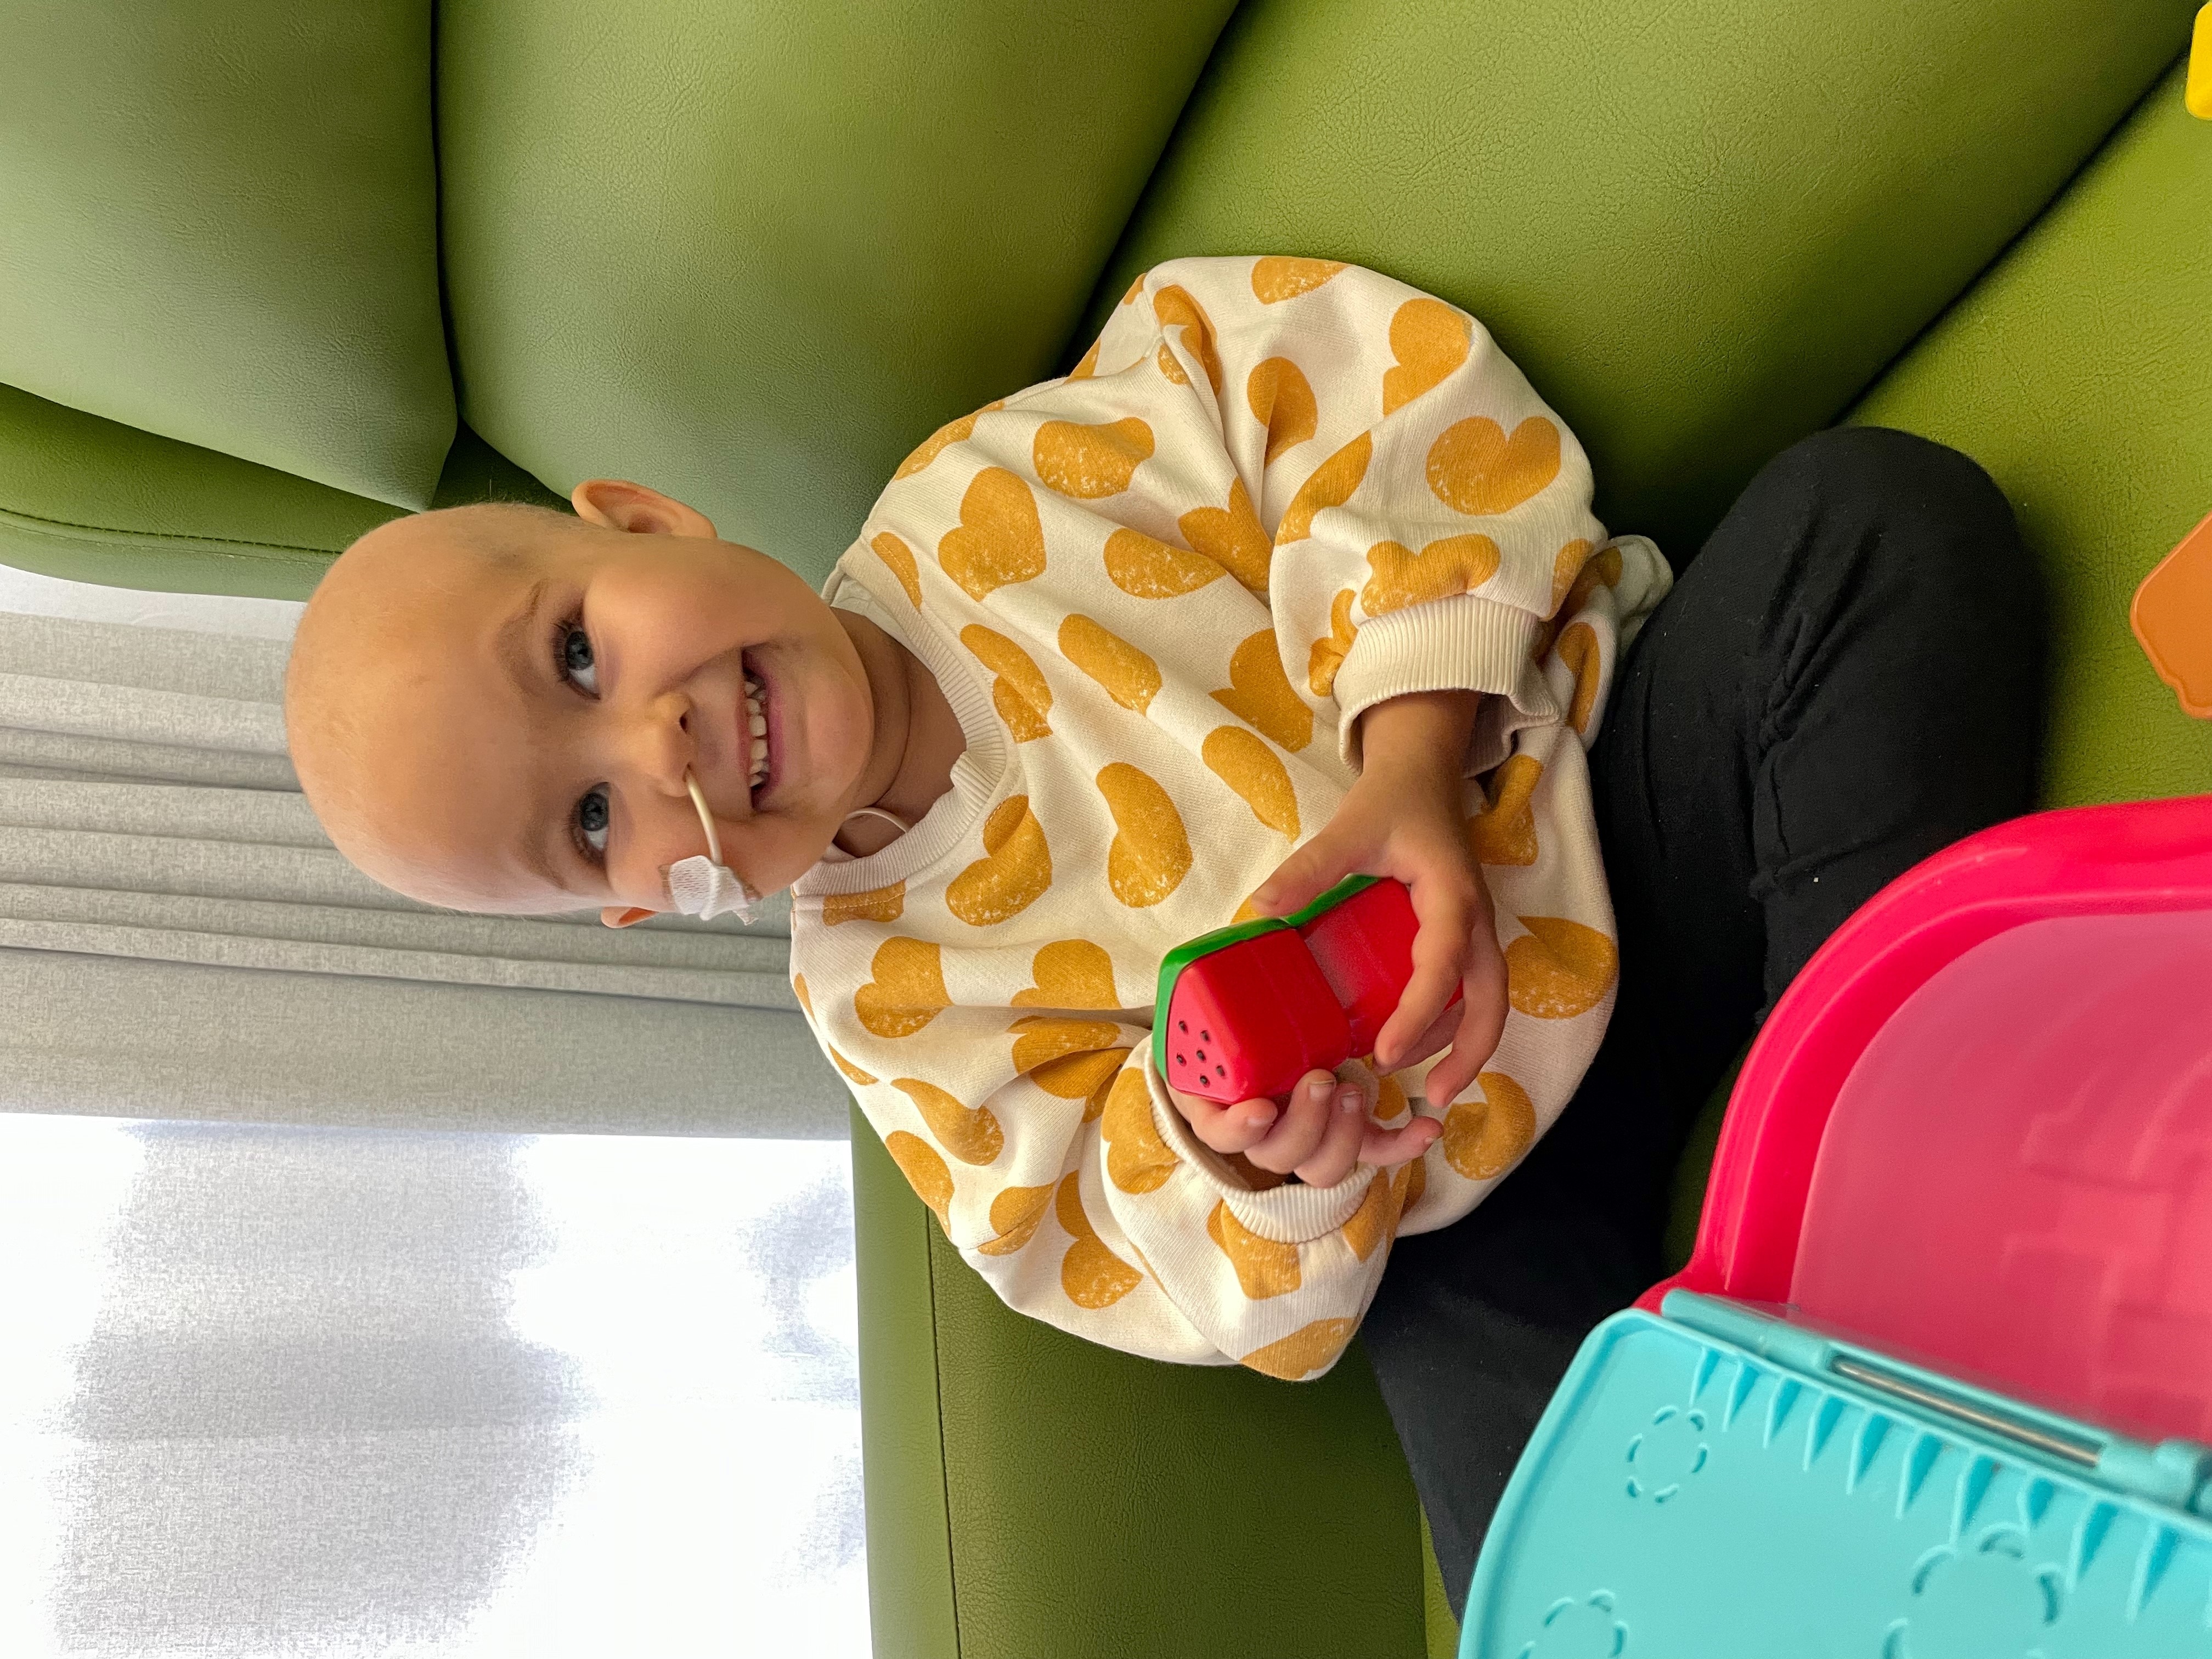 Picture of Cora sitting upright on a bright green chair. She is wearing a white jumper with yellow hearts. She is holding a toy. 